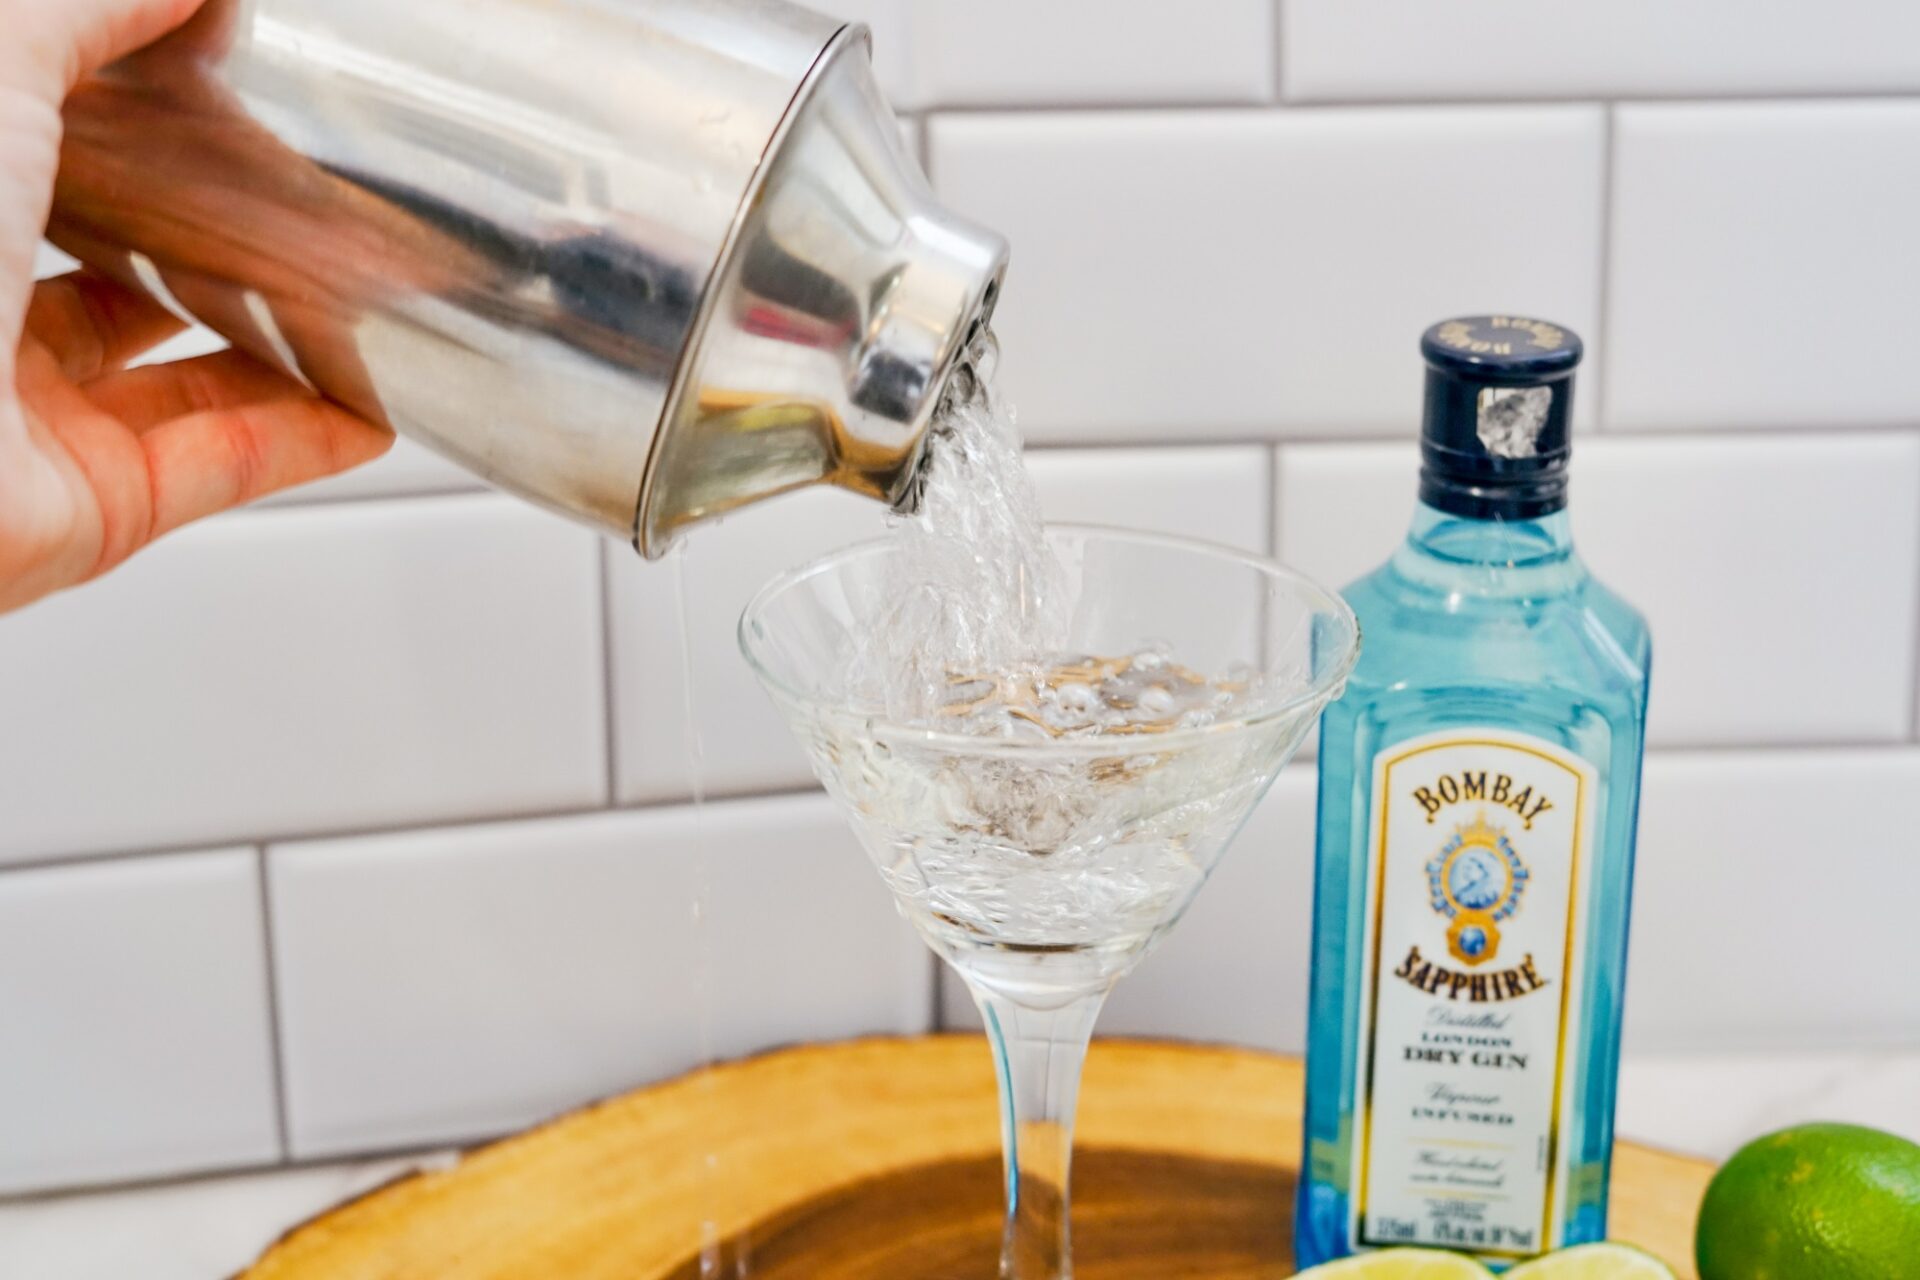 Pouring gin gimlet into a martini glass.